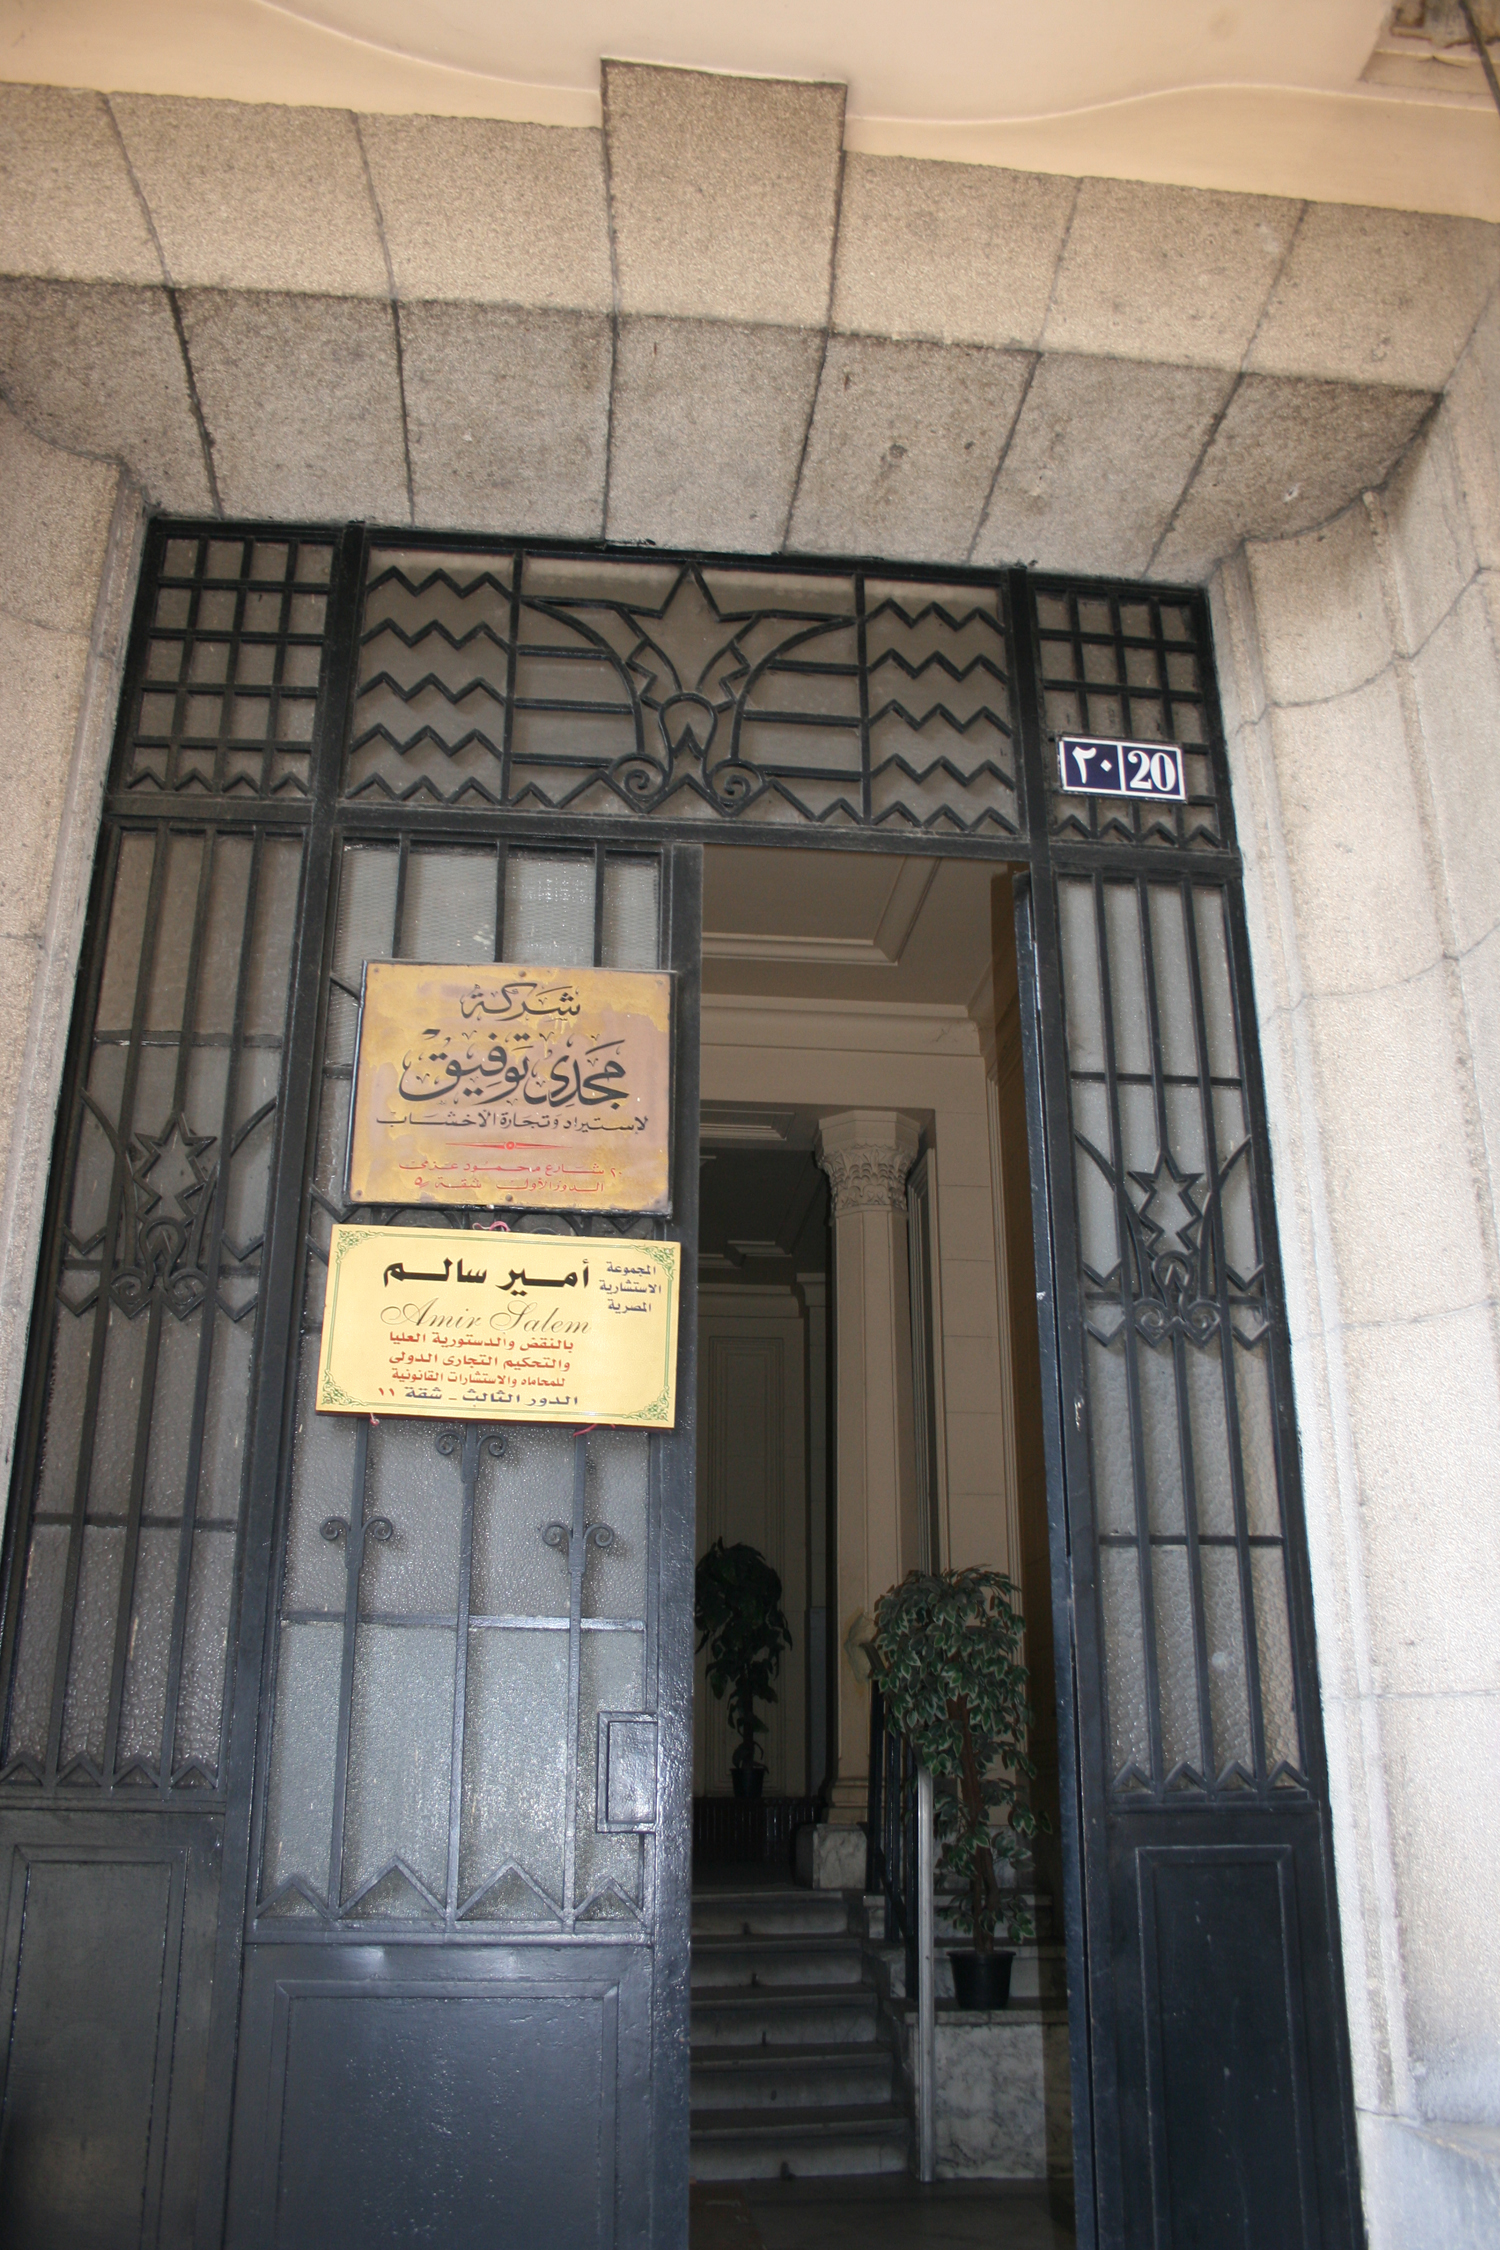 Main entrance door with wrought iron decoration